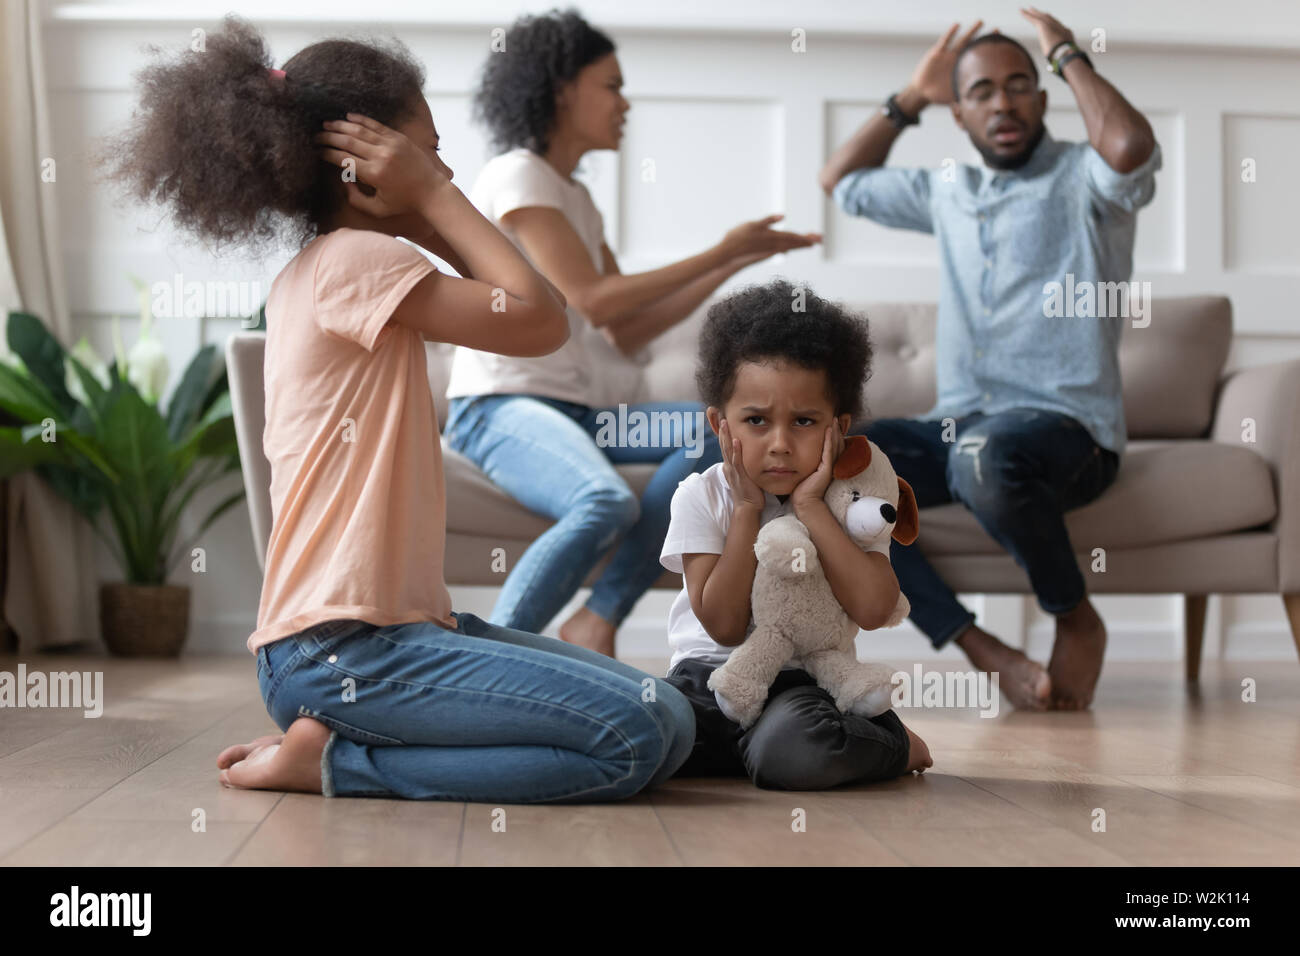 Upset african kids closing ears hurt by parents fighting Stock Photo